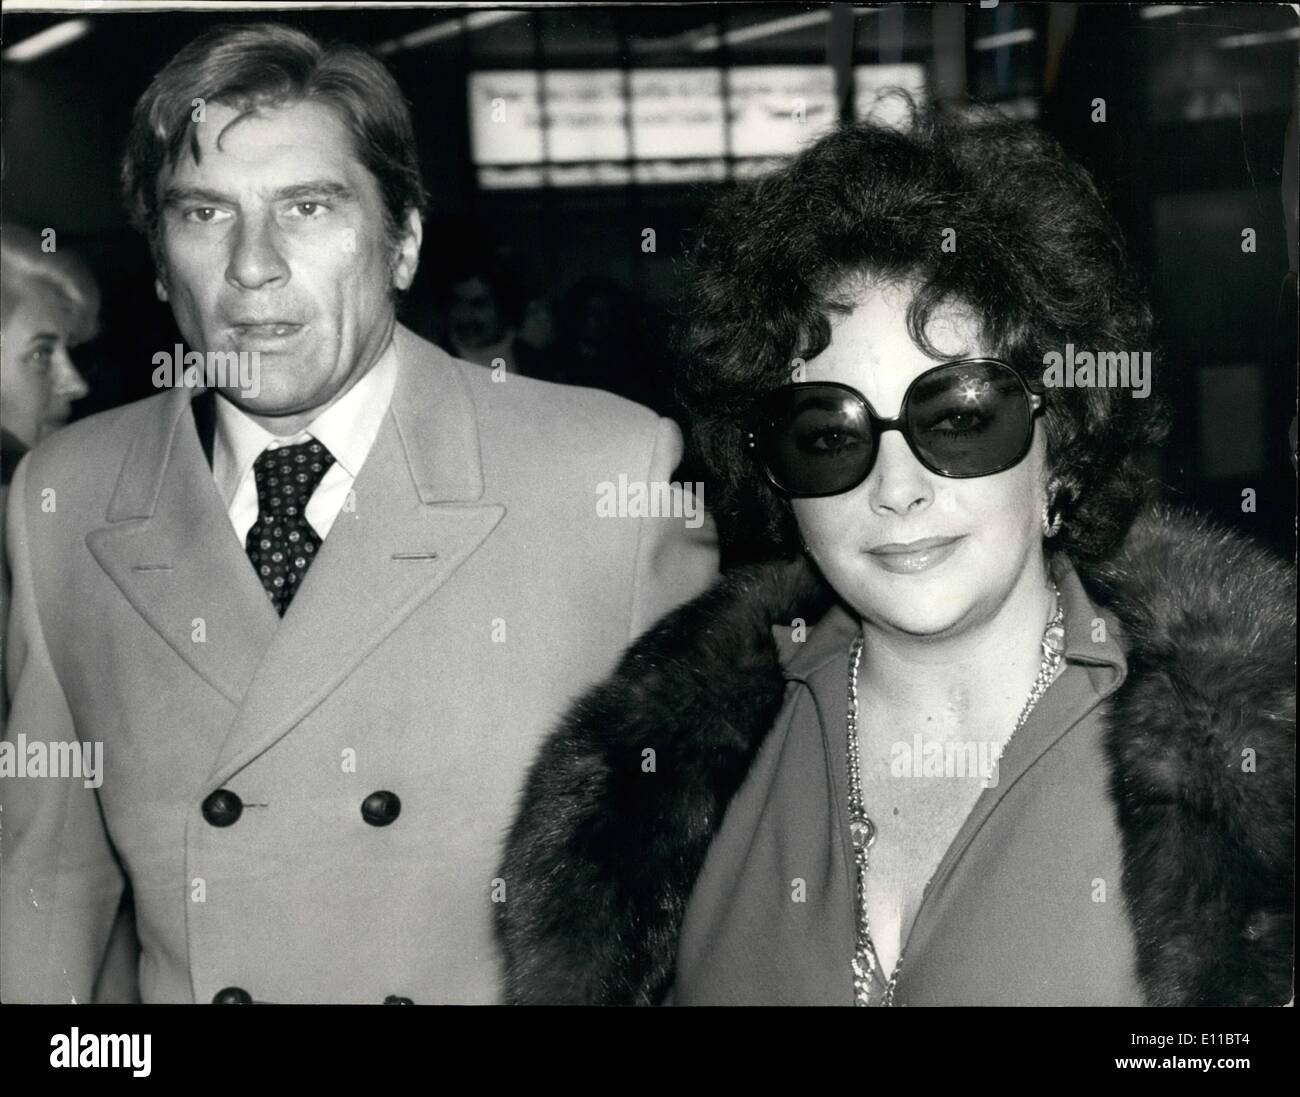 Dec. 12, 1976 - Elizabeth Taylor Arrives With Husband Number Seven: Elizabeth Taylor flew into Heathrow Airport today with her seventh husband, 49-year-old John Warner a former U.S. Secretary for the Navy. The couple were married recently at the politician's estate in the Blue Ridge Mountains, near Middlesburg, Virginia. Liz, 44, and her husband are staying at the Dorchester Hotel in London. Richard Burton, who was married to Liz for the ten years, has also booked into the same hotel with his new wife Suzy Hunt, the former wife of James Hunt, the world champion motor racing driver Stock Photo